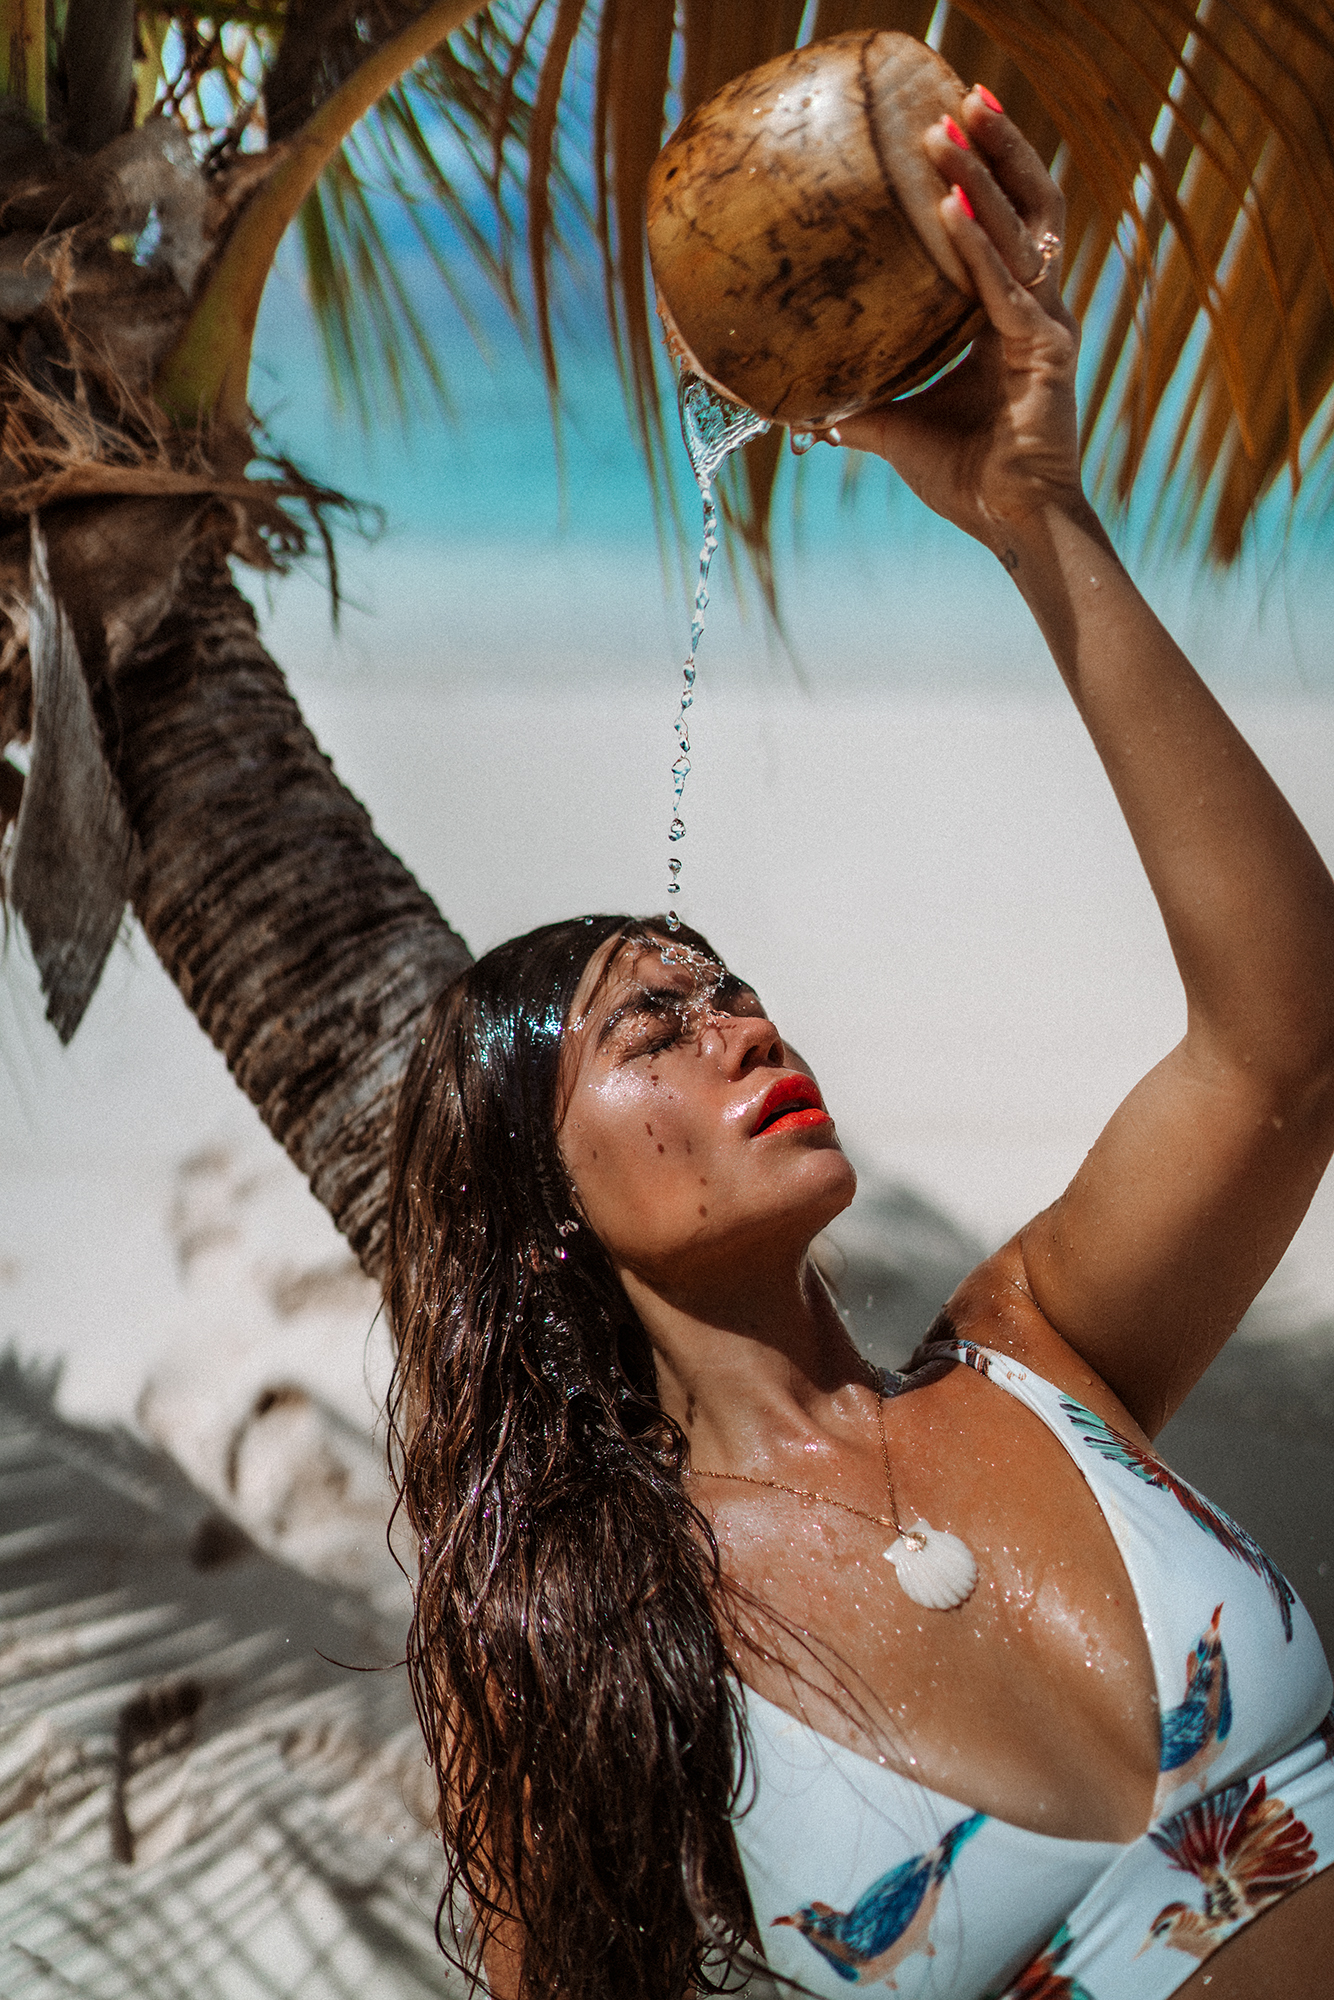 Summer Waterproof Makeup: All You Need To Know